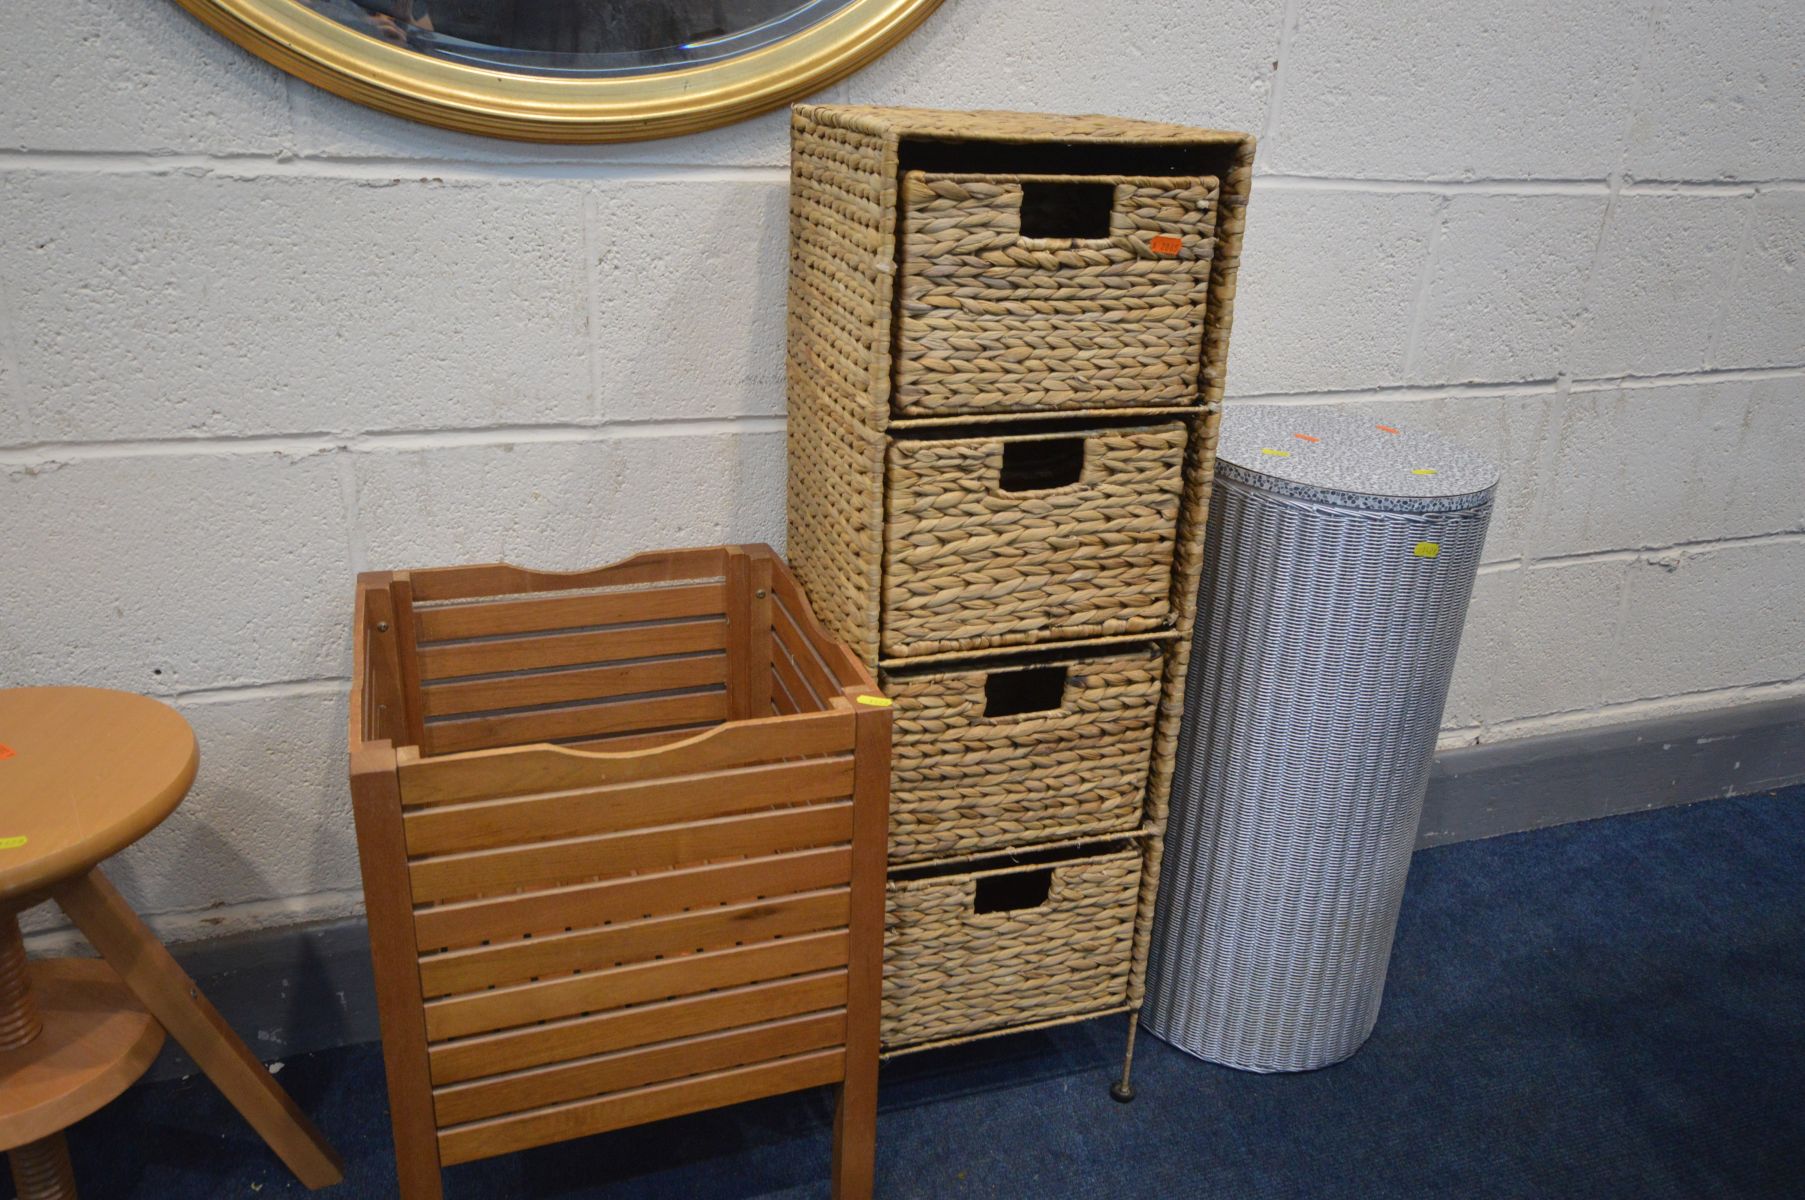 A SELECTION OF OCCASIONAL FURNITURE, to include Lloyd loom cylindrical linen basket, along with a - Image 2 of 2